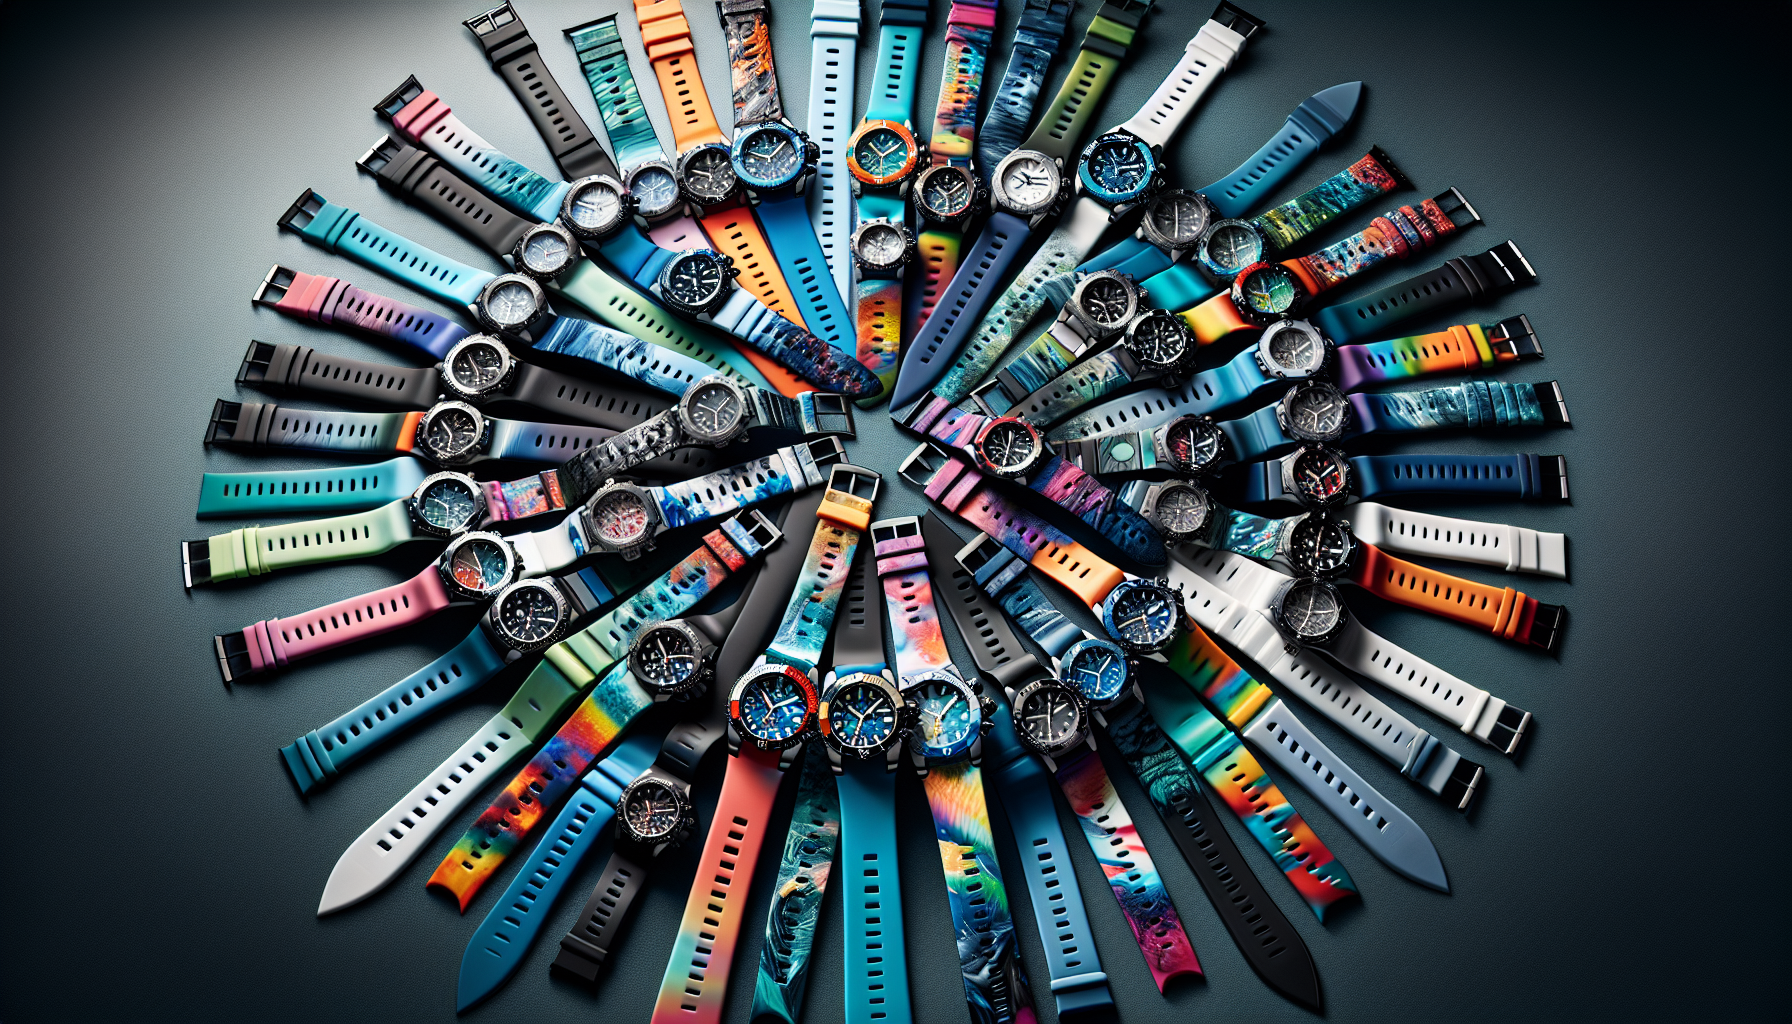 Illustration of a variety of Shark watch bands in different colors and designs